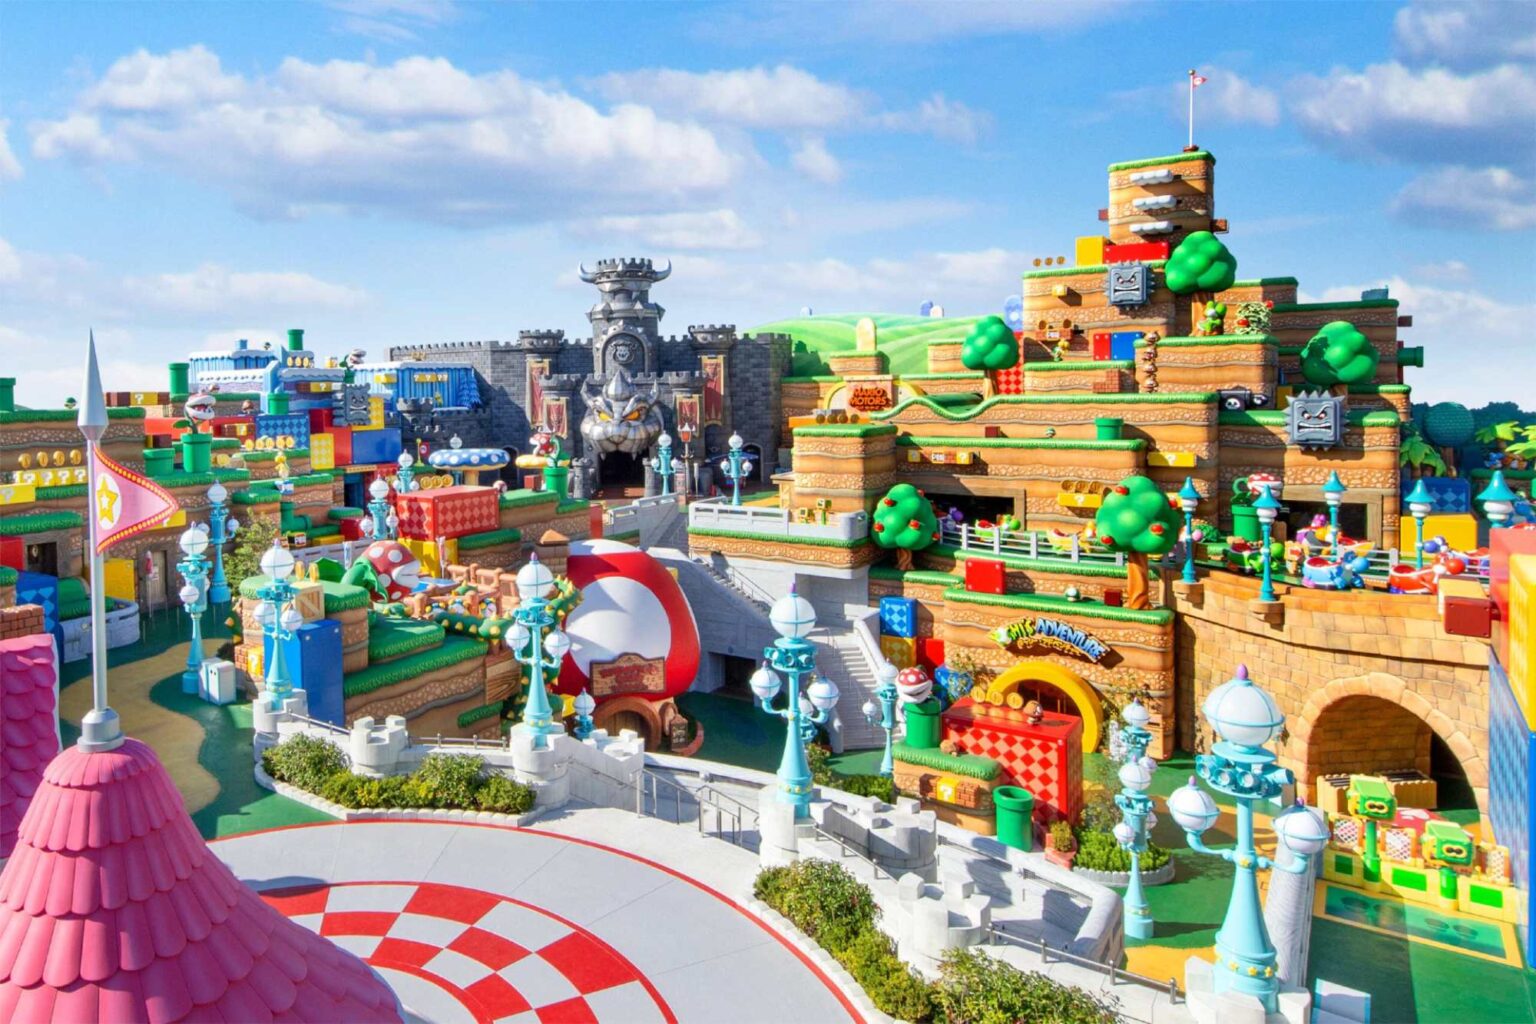 Super Nintendo World has given fans a tour of their Japanese location. Find out what the new park has in store for fans.